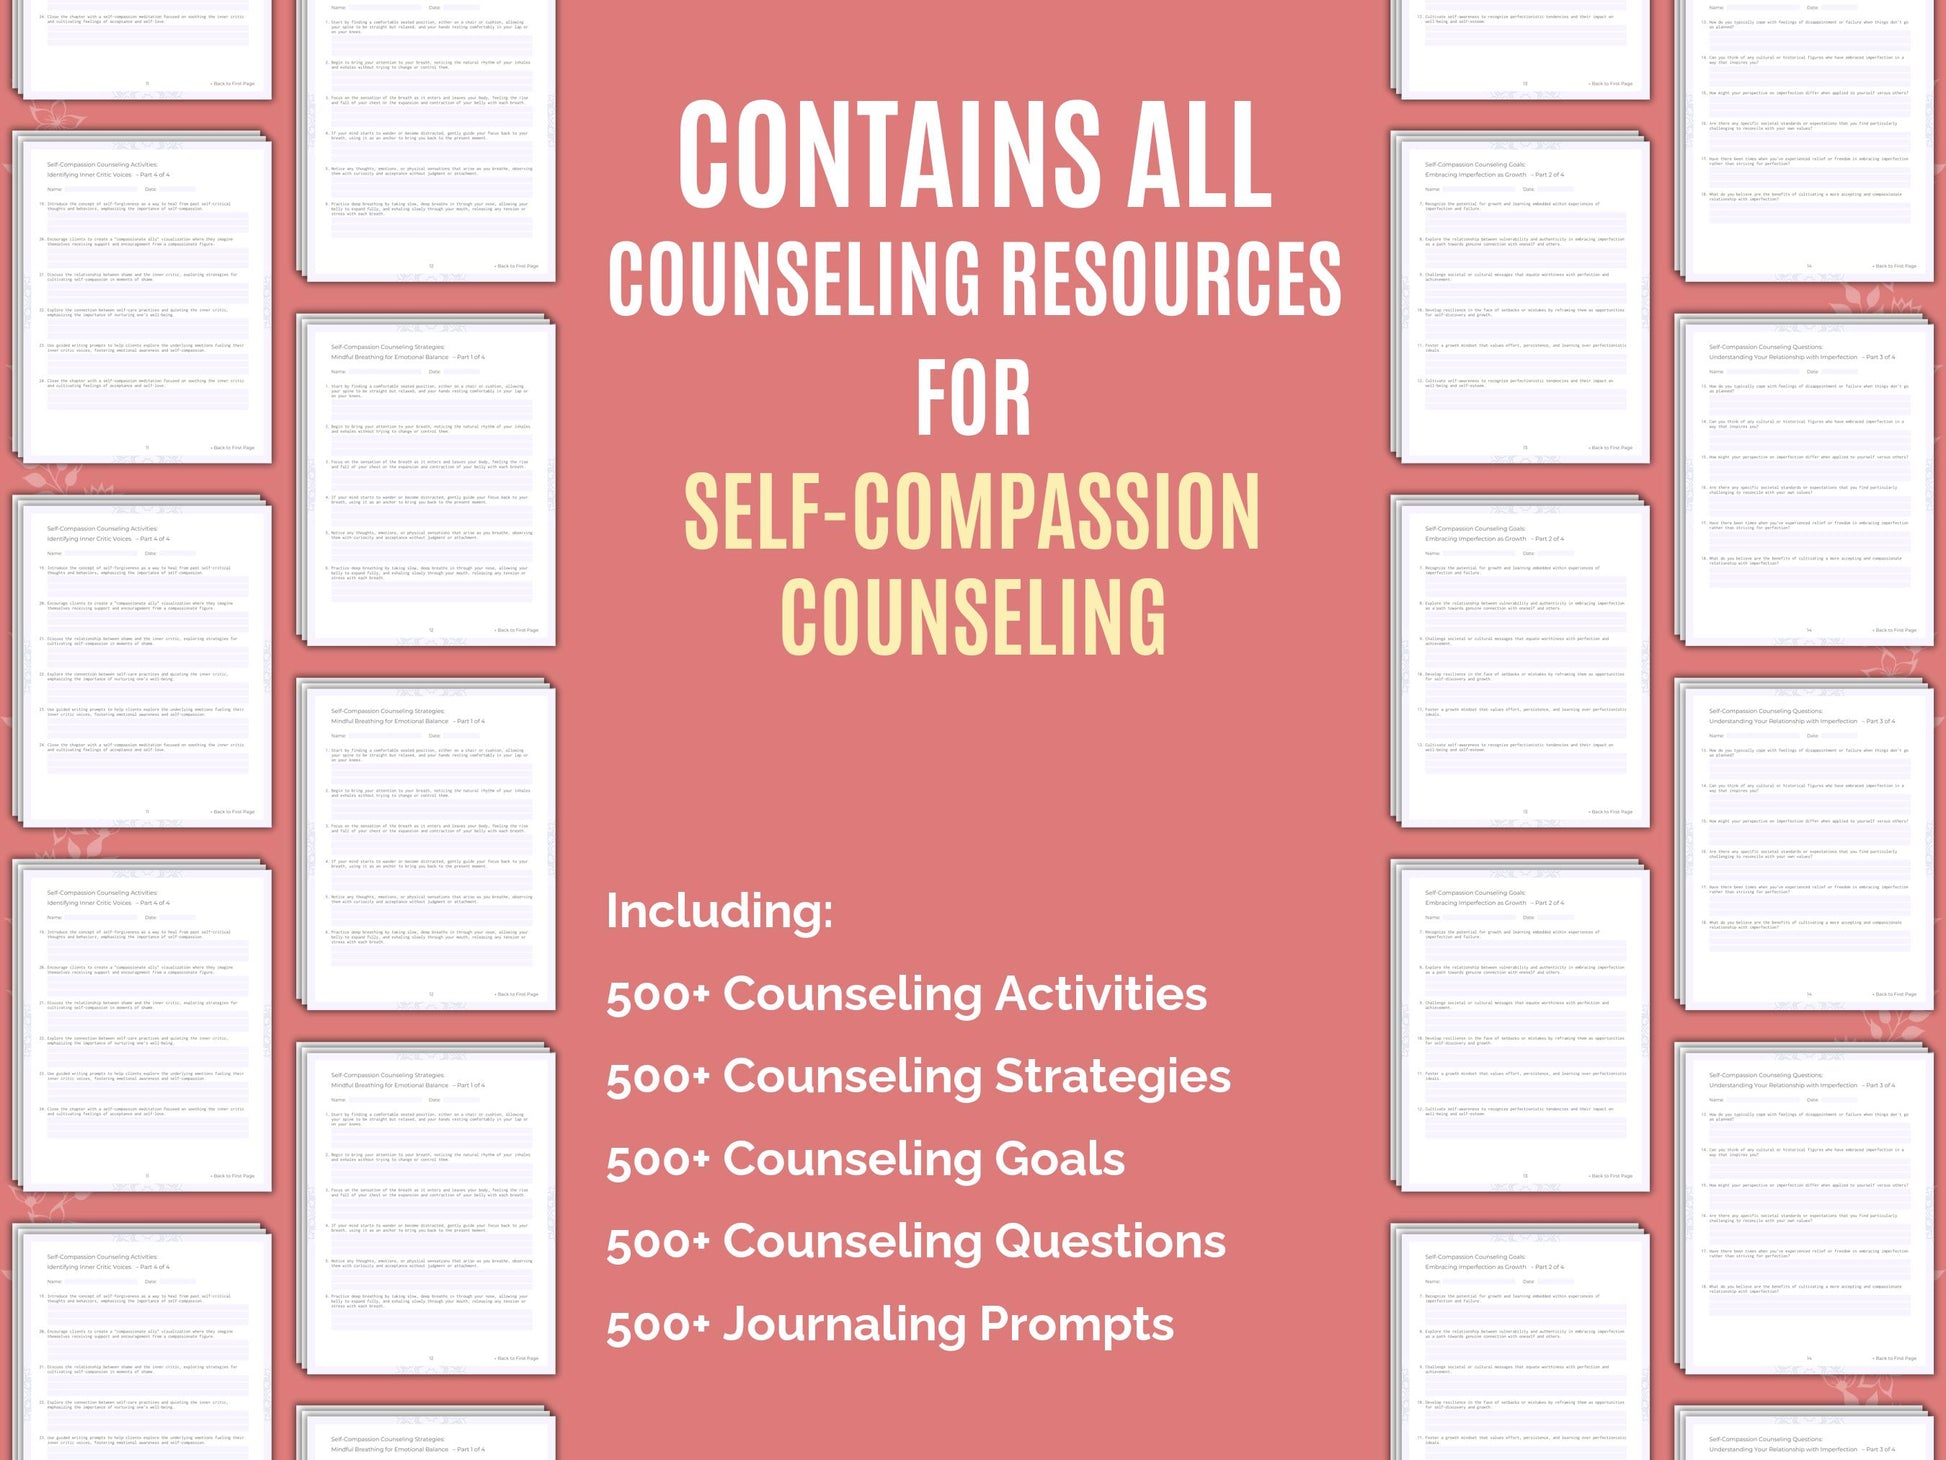 Therapist, Self-Compassion Tool, Template, Workbook, Self-Compassion, Self-Compassion Idea, Content, Counselor, Counseling, Mental Health, Therapy, Resource, Worksheet